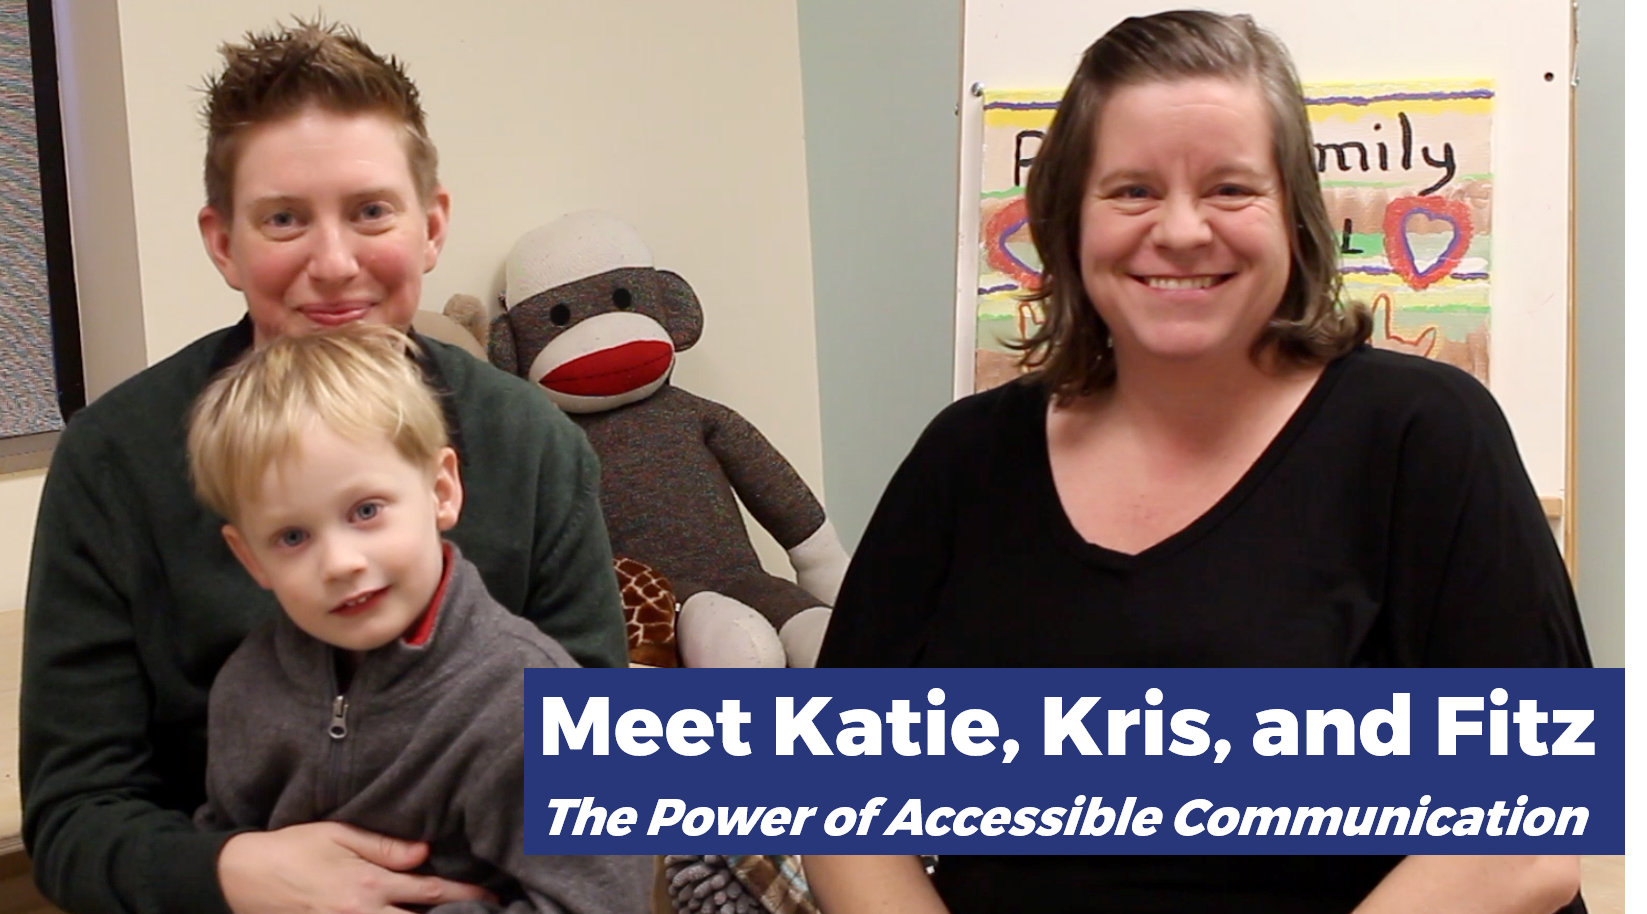 Katie, Kris, and Fitz smiling for the camera. Two adults and one child sitting in a classroom. The adult on the left has short, spiky light brown hair with light skin and a dark gray sweater. They are sitting with the child, who has short, straight blonde hair with a gray sweater. The person on the right has brown hair down to their shoulders and light skin, with a black blouse. In the bottom right, blue bars have the text: "Meet Katie, Kris, and Fitz / The Power of Accessible Communication".